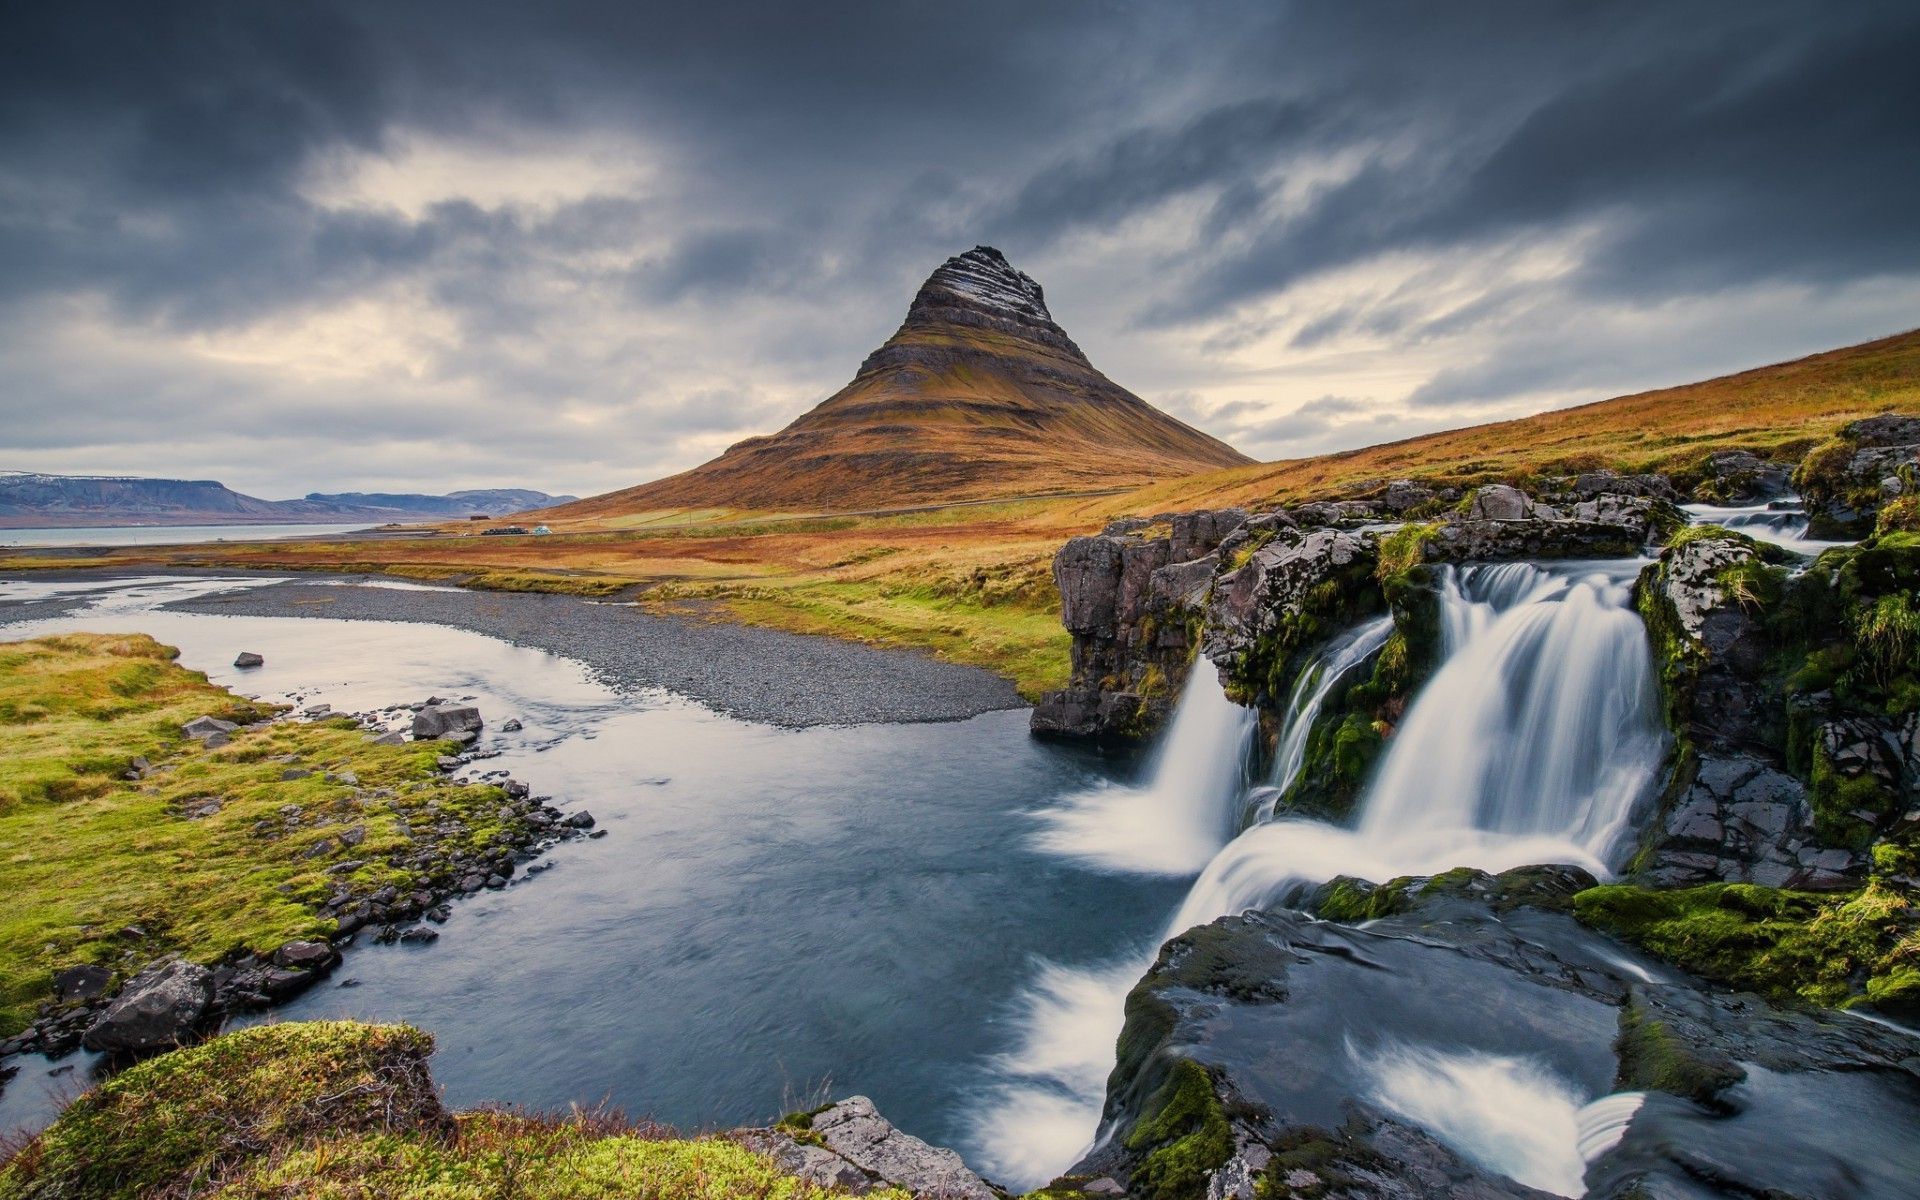 Iceland wallpapers hd high quality for desktop